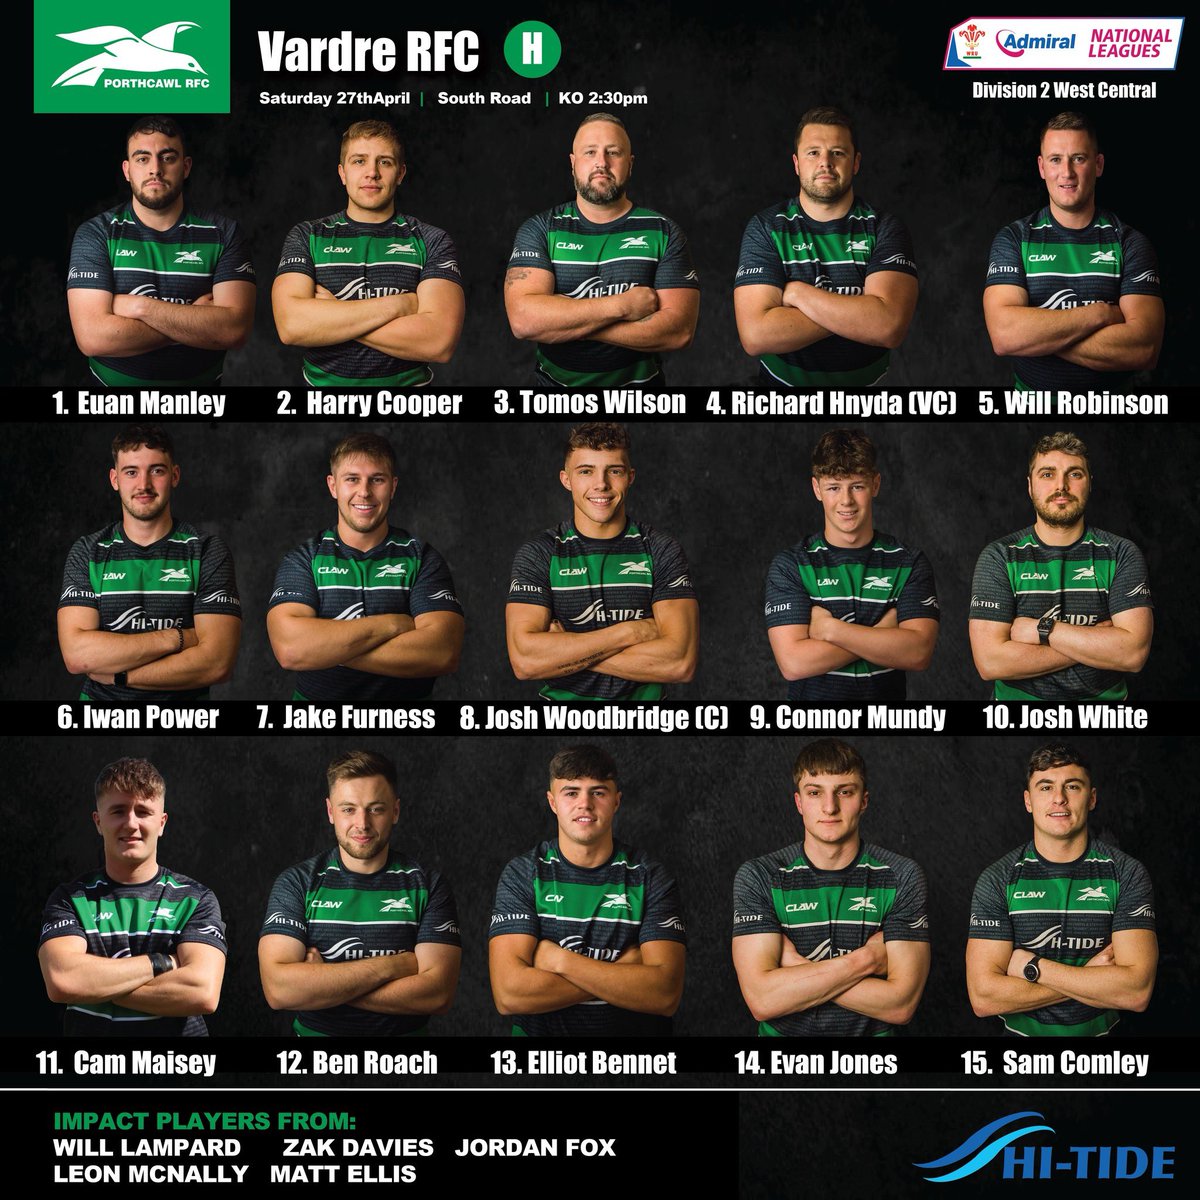 🚨 Team Announcement 🚨

Here's our Senior Men's team selected to play Vardre tomorrow afternoon in the Division 2 League fixture.

🆚  Vardre RFC
📍  South Road
📅  Saturday 27th April
⏰  2:30pm
...
#UppaGulls 
#Division2WestCentral
#GrassRootsRugby
💚🖤